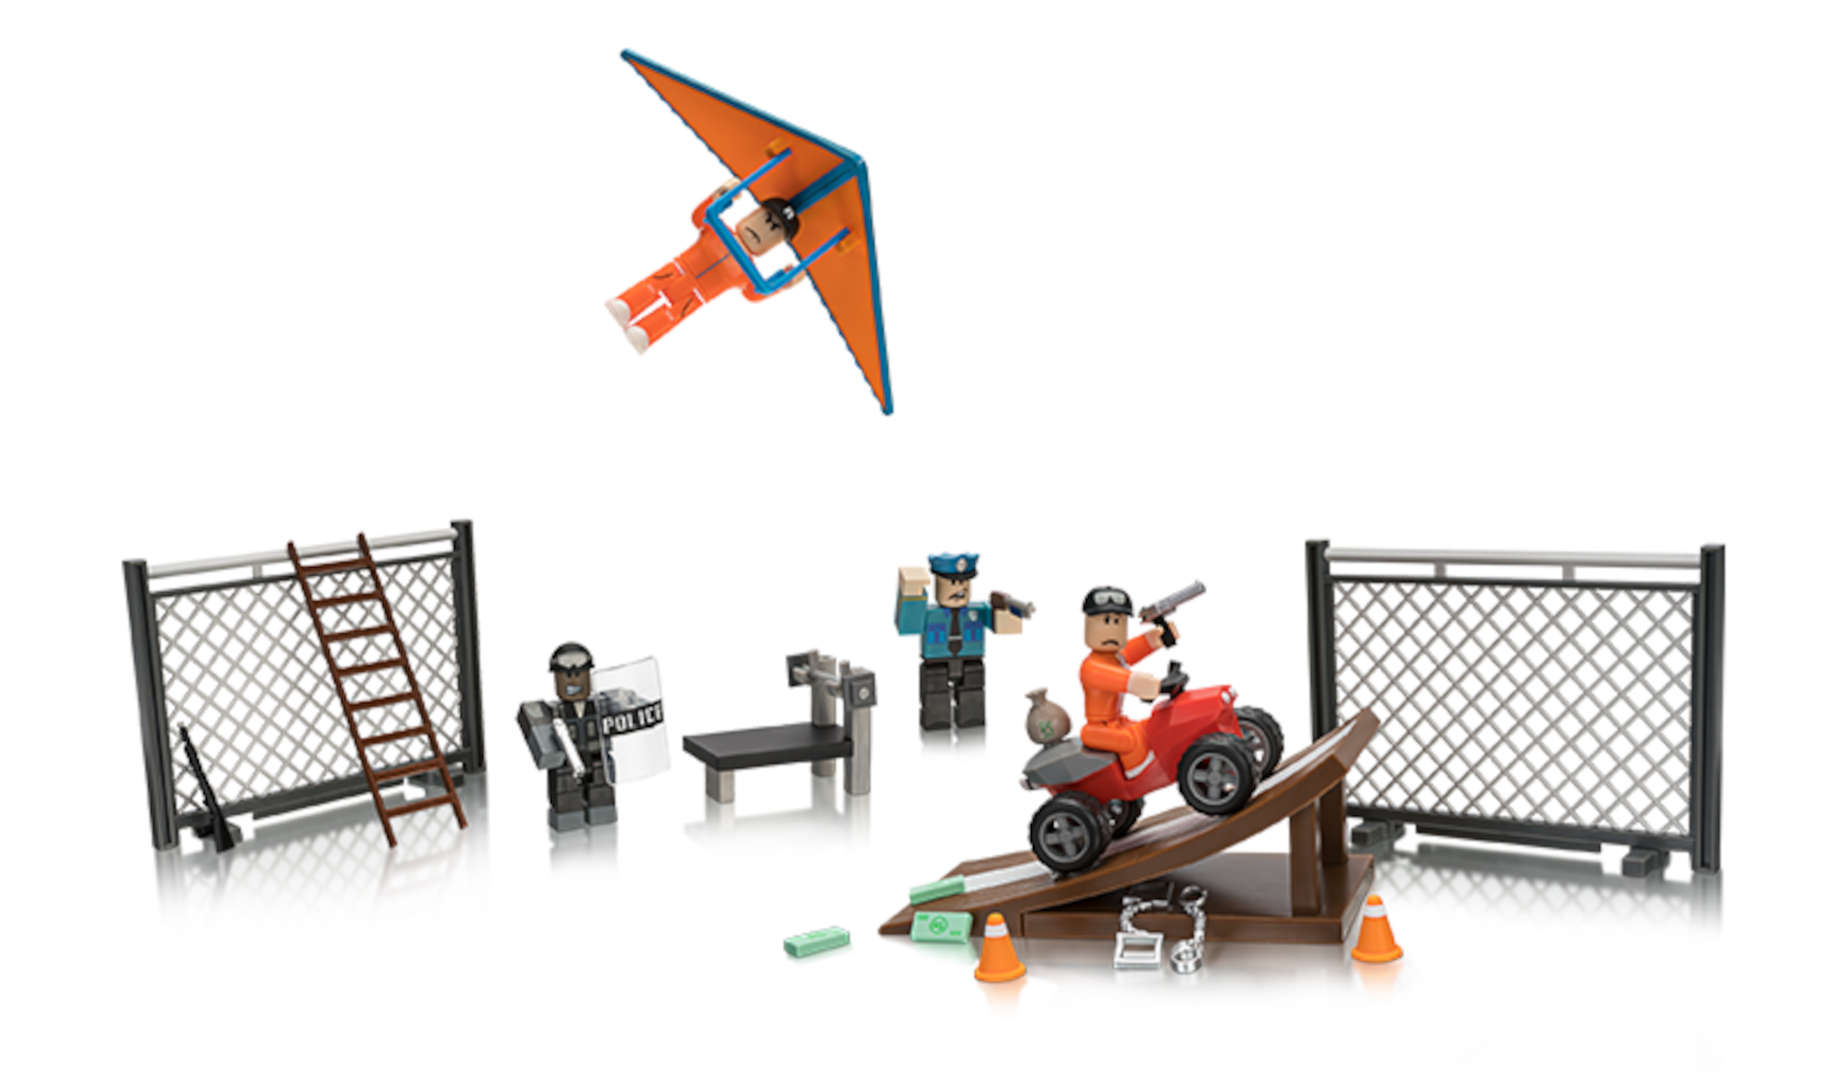 Roblox Toys Our Favourite Roblox Playsets Pocket Tactics - brand new roblox jailbreakmuseum heist toy playset rare